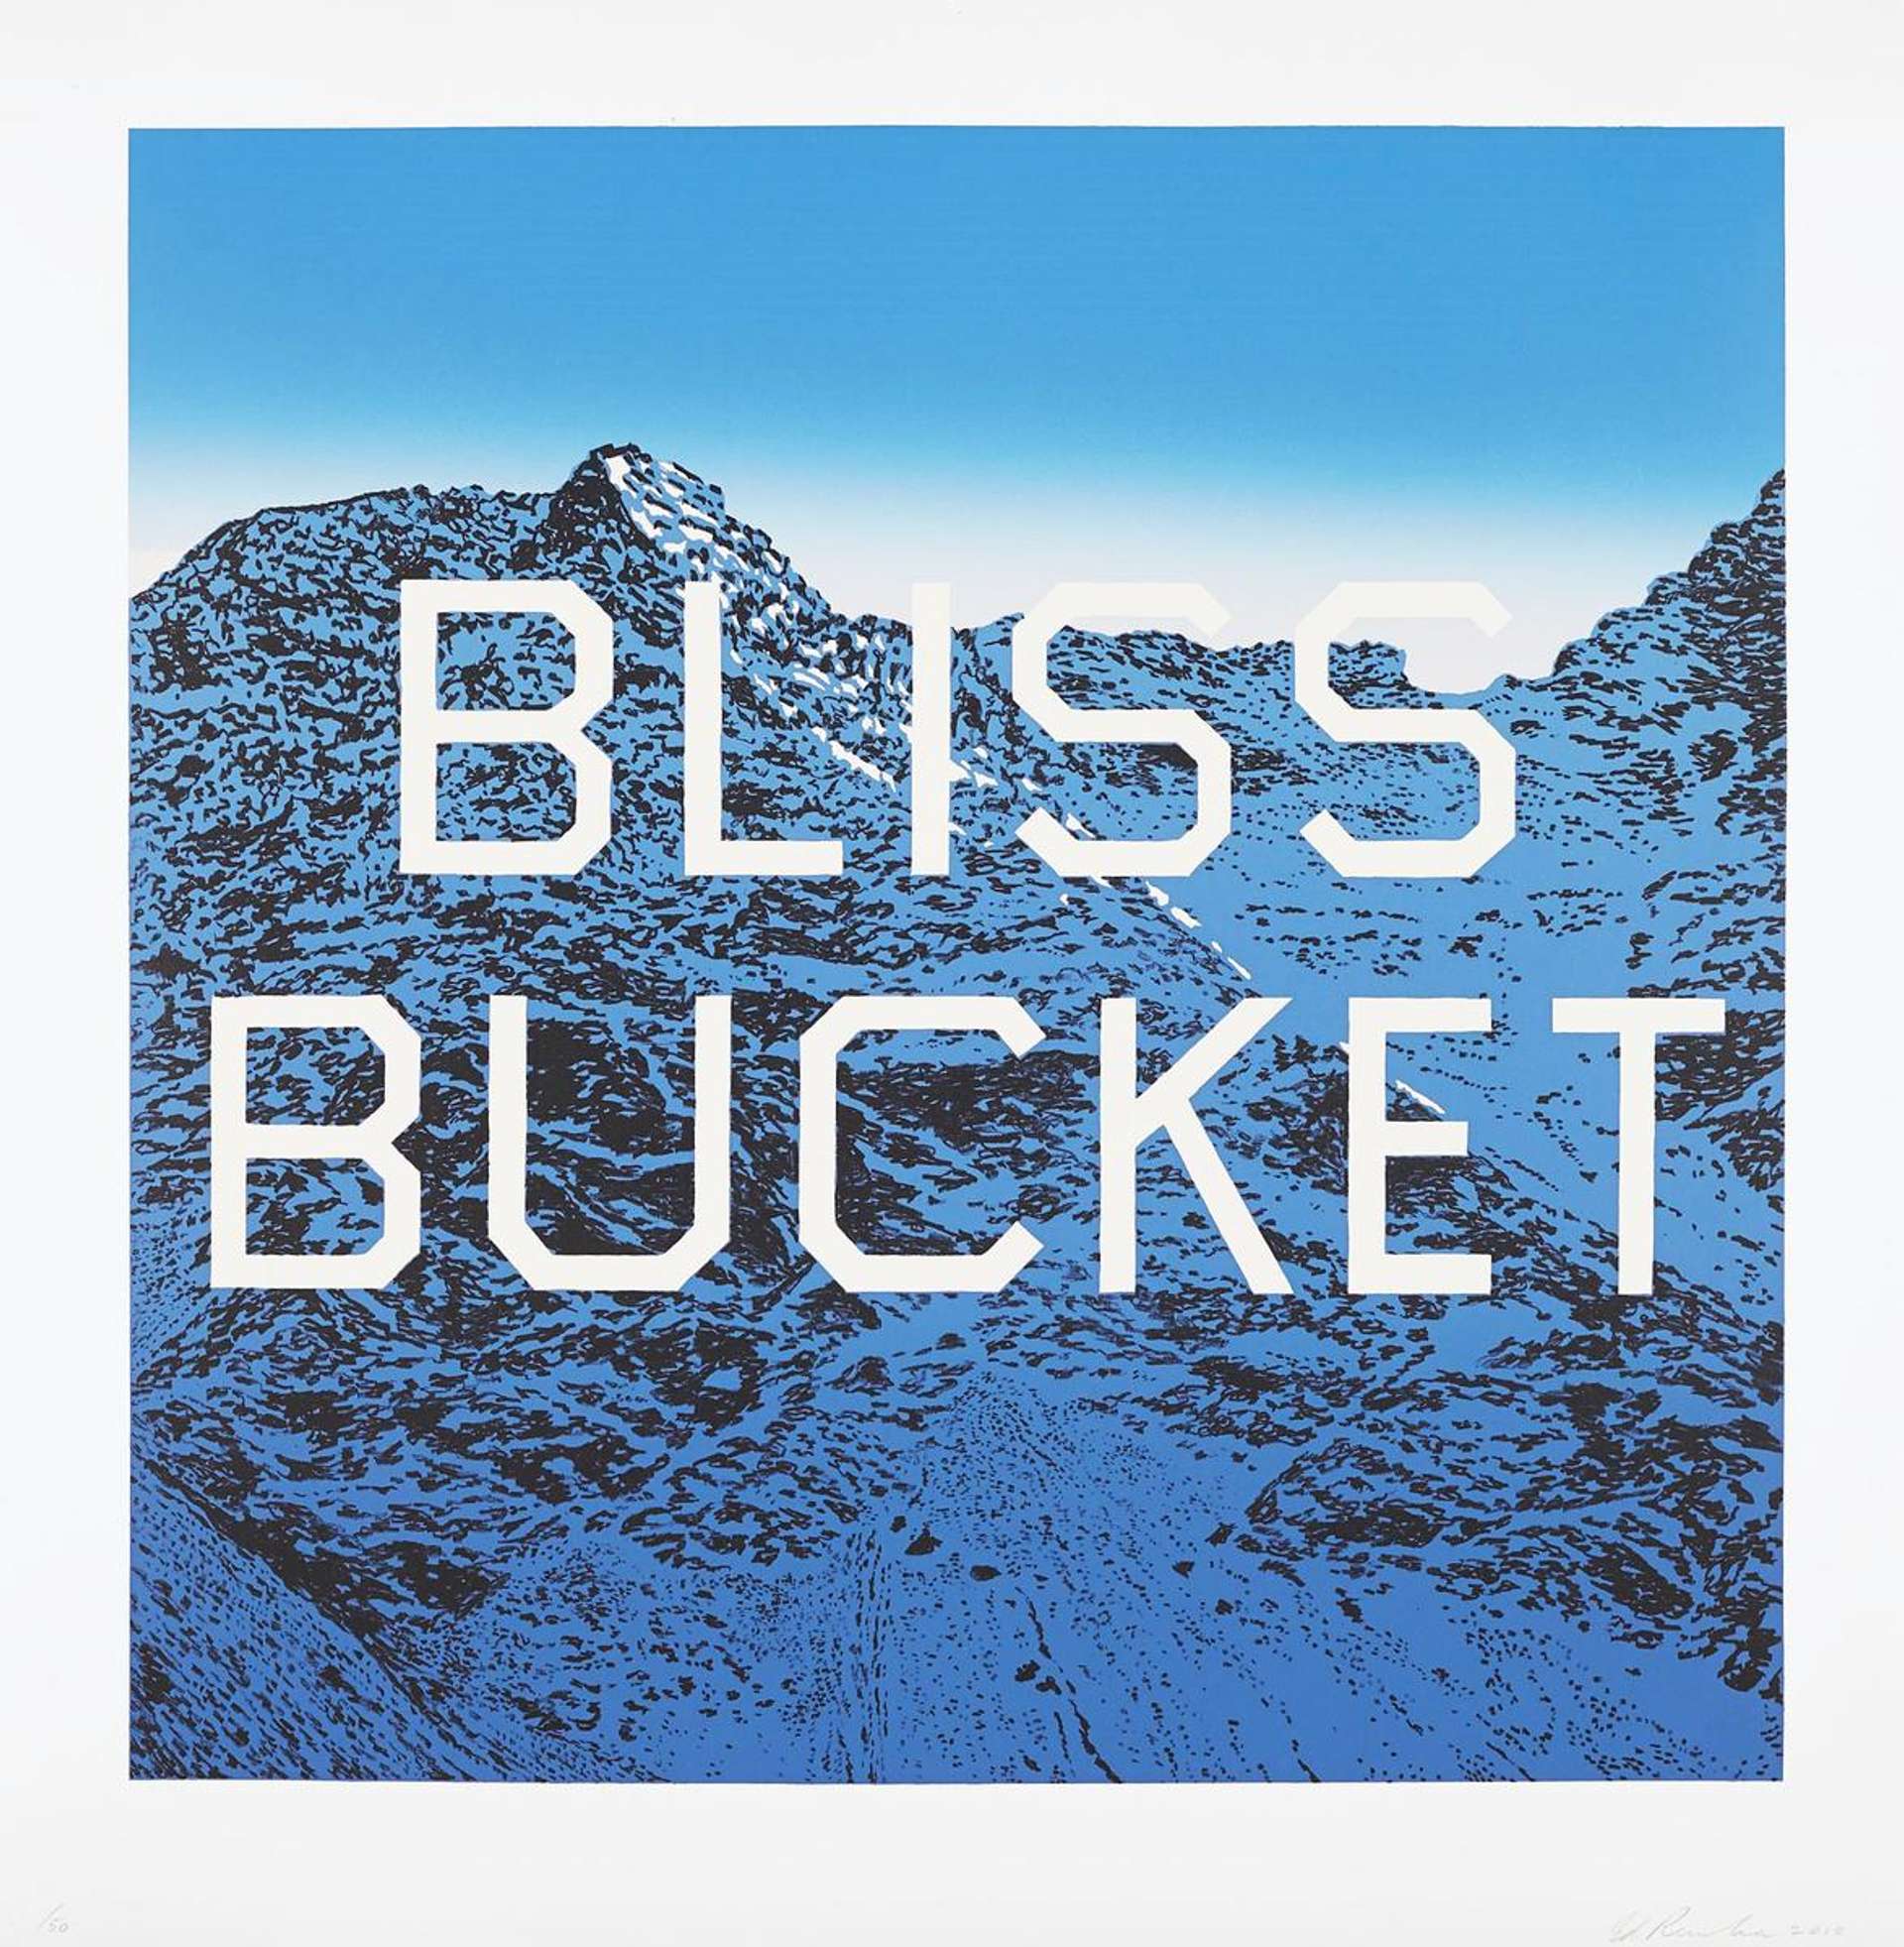 Lithograph by Ed Ruscha depicting the words 'BLISS BUCKET' in white, capitalised lettering, set against a backdrop of a blue, black and white mountain scape.